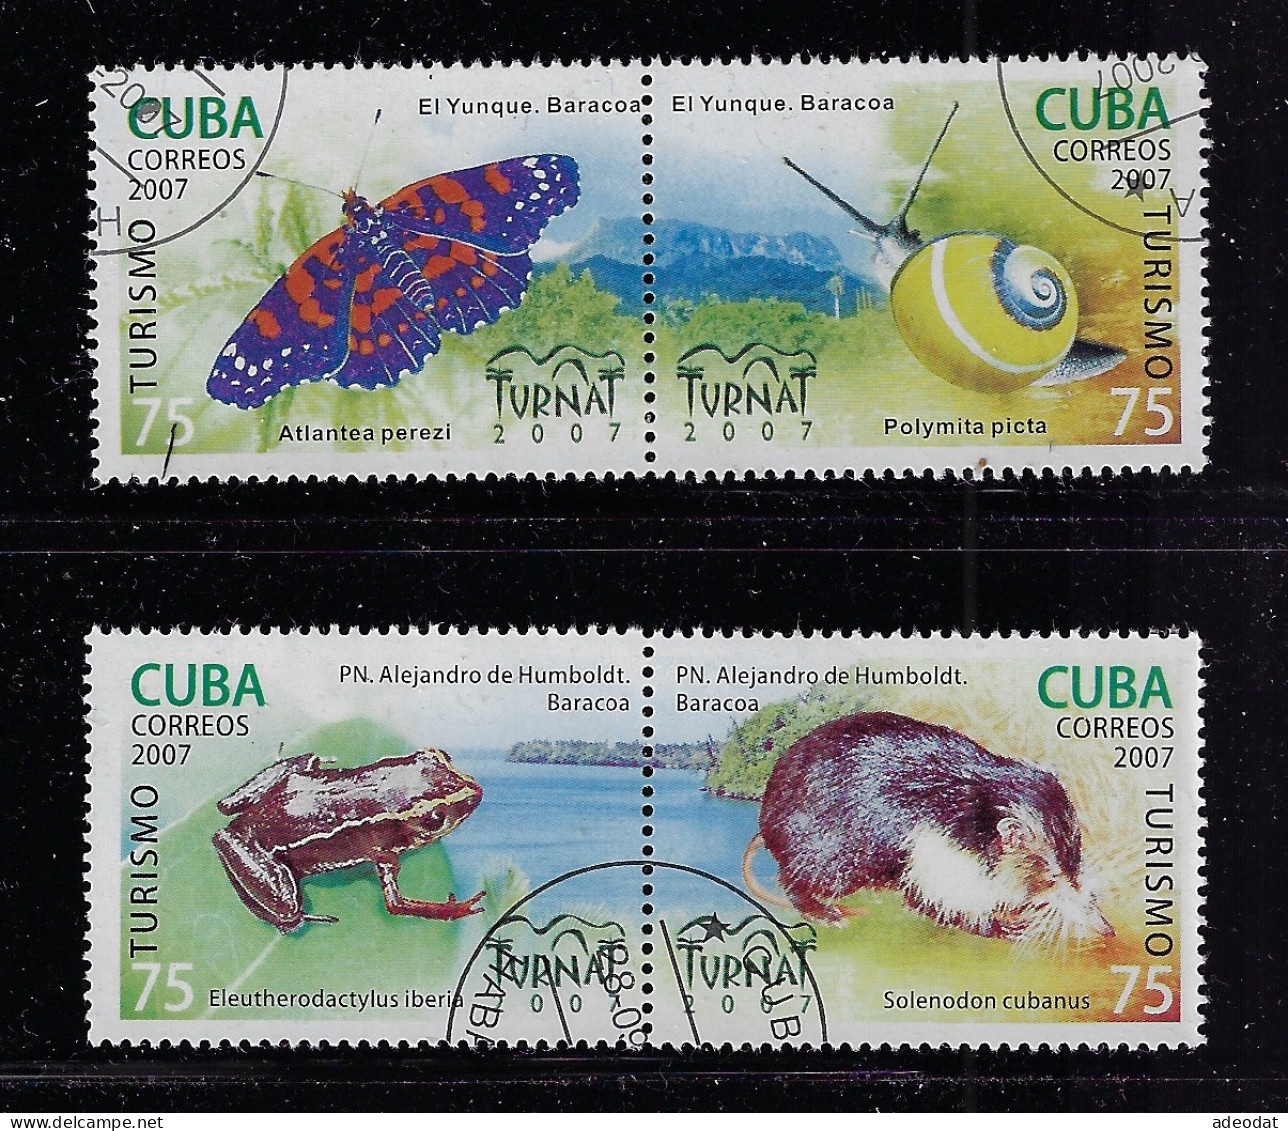 CUBA 2007 SCOTT 4783-4784 CANCELLED - Used Stamps